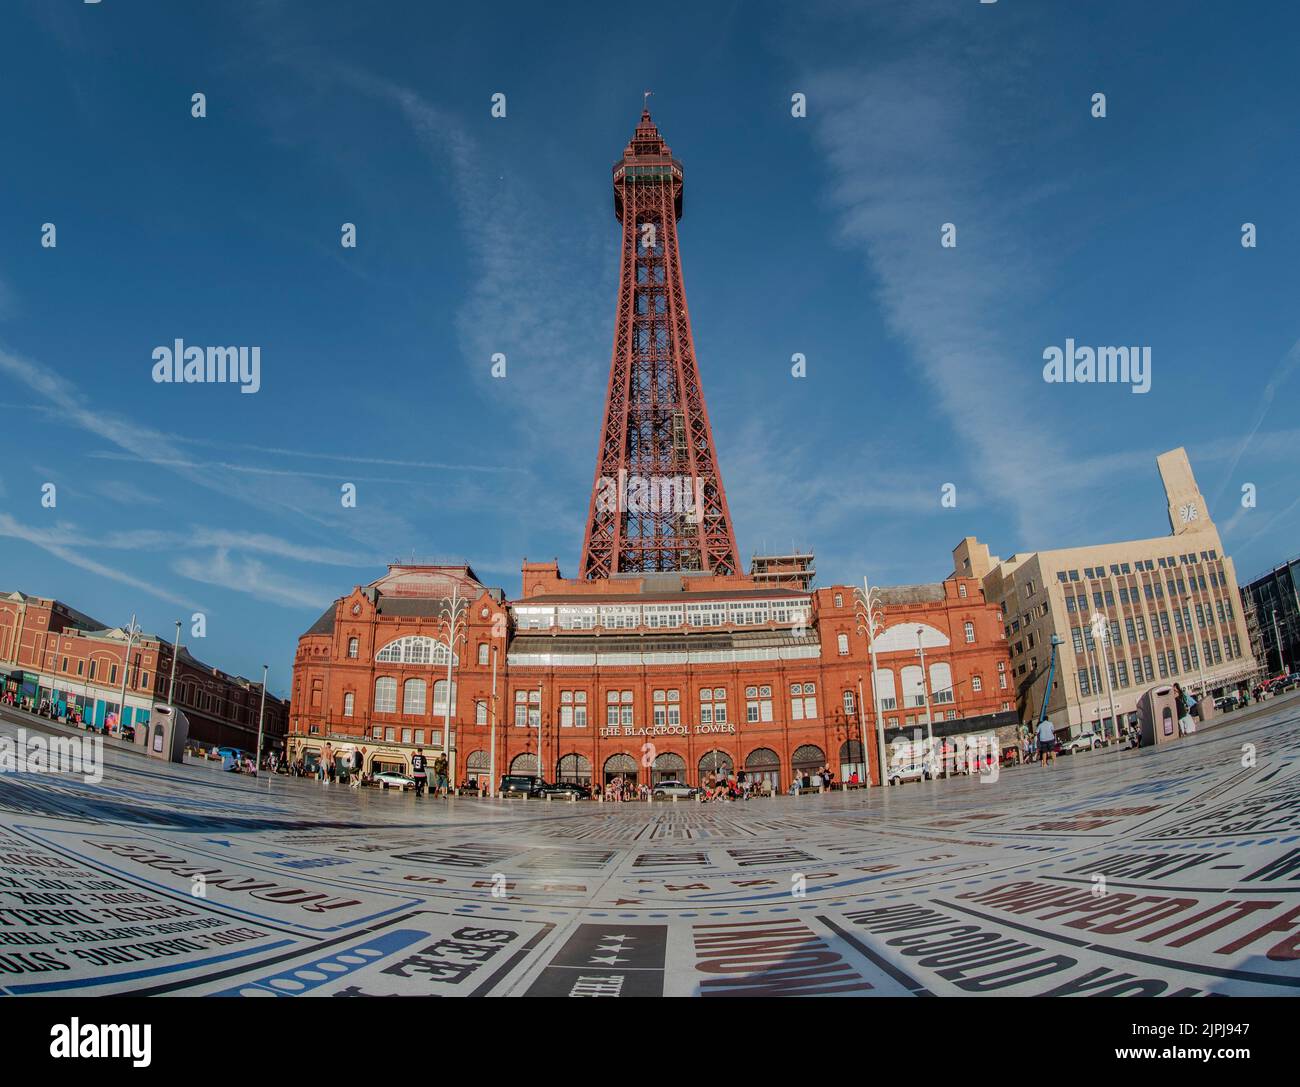 Blackpool Tower - Looking across from Blackpool Promenade, UK holiday Destinations - Summer 2022 Stock Photo